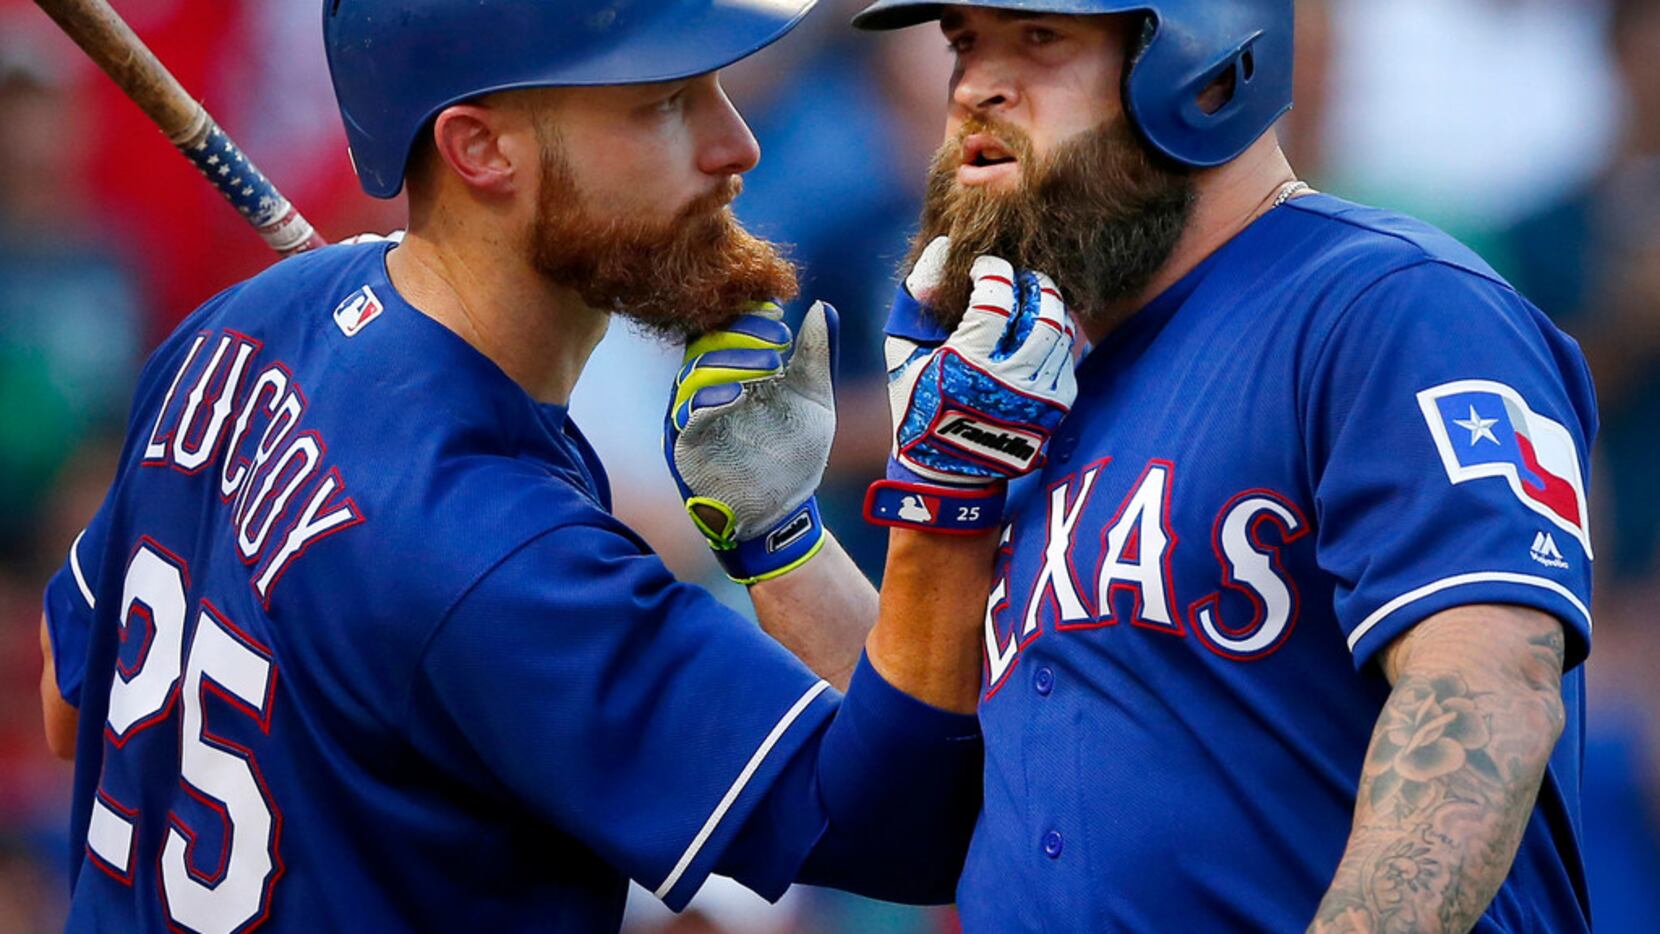 Rangers to decline option on Mike Napoli's contract for 2018